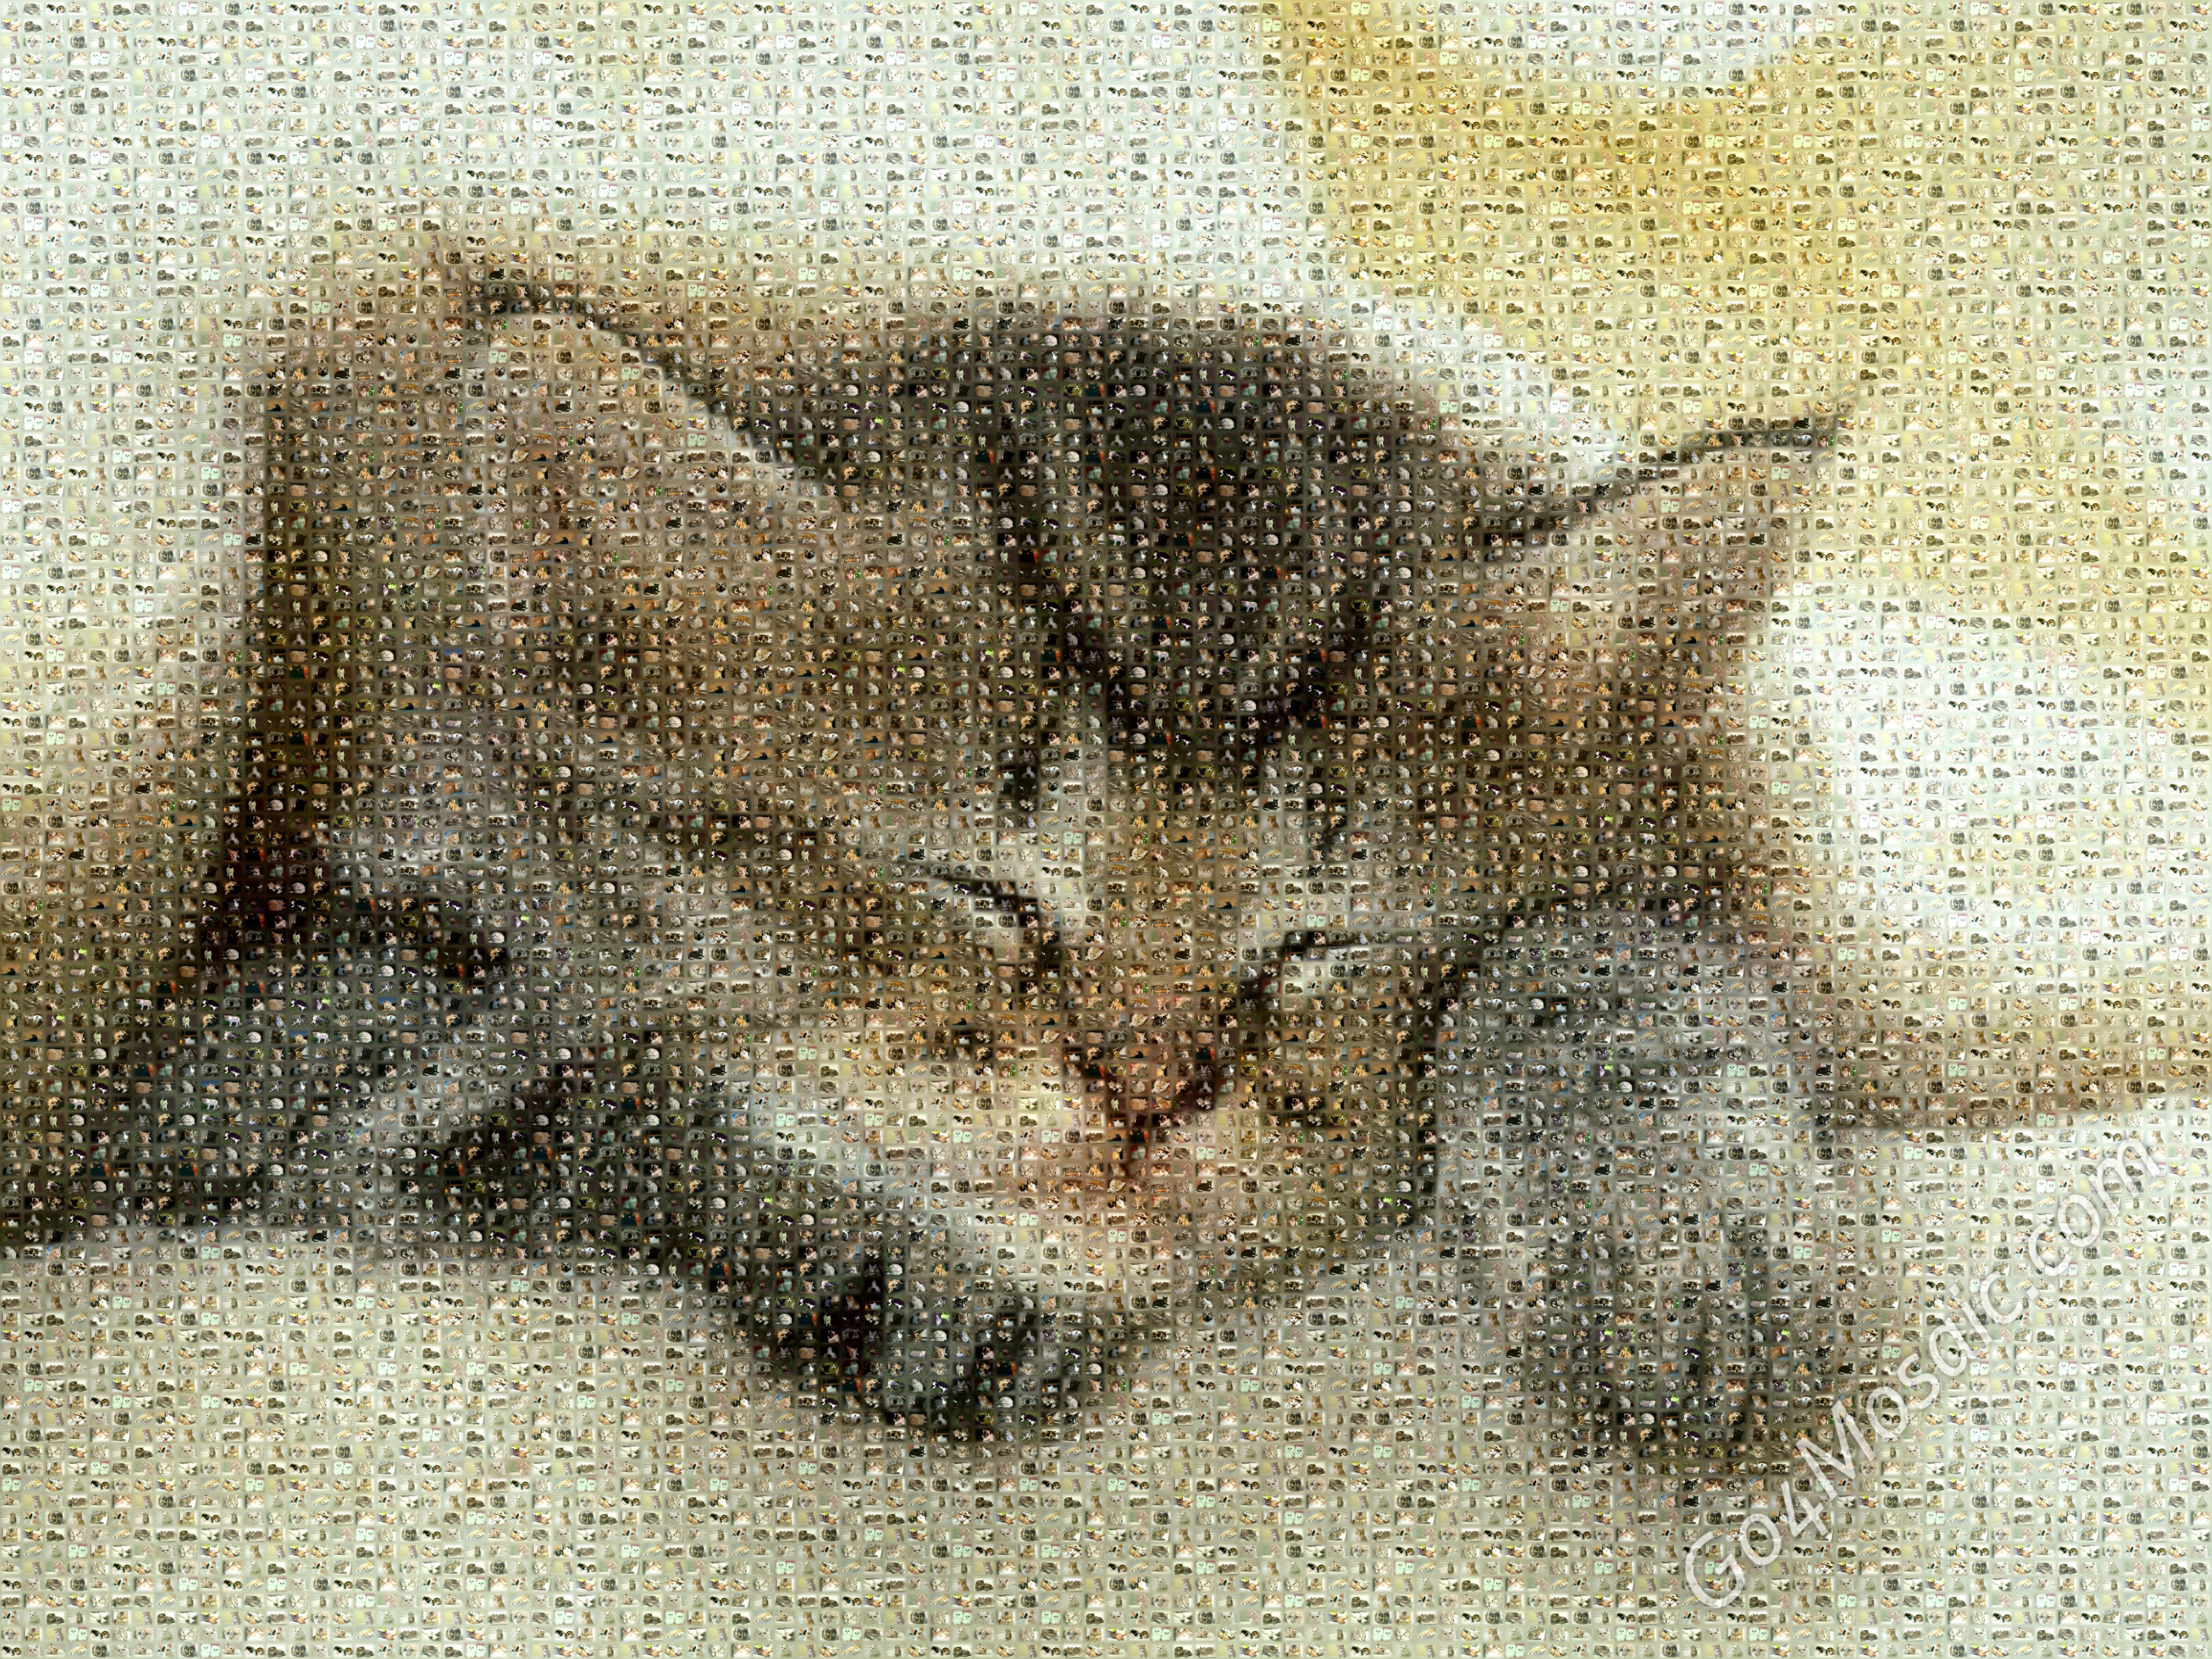 Kitty mosaic from Cats